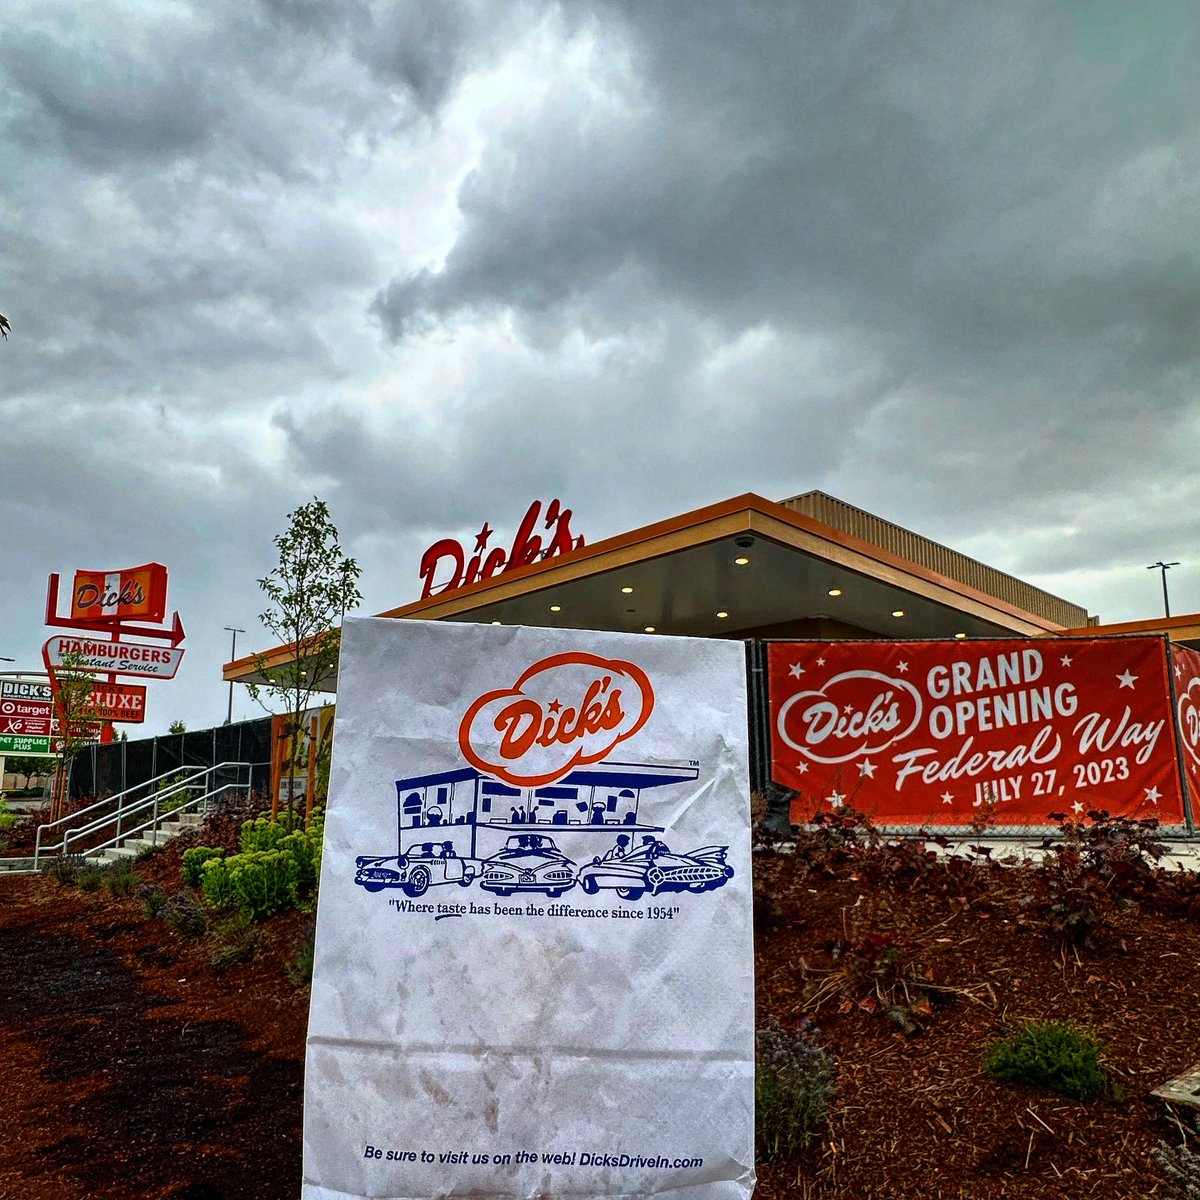 Burger Dreams become Burger Reality this Thursday at 10:30 AM when our Federal Way location opens. RT a friend who needs to know for your chance to win $20 in gift certificates. #newlocation #burgers #fries #shakes